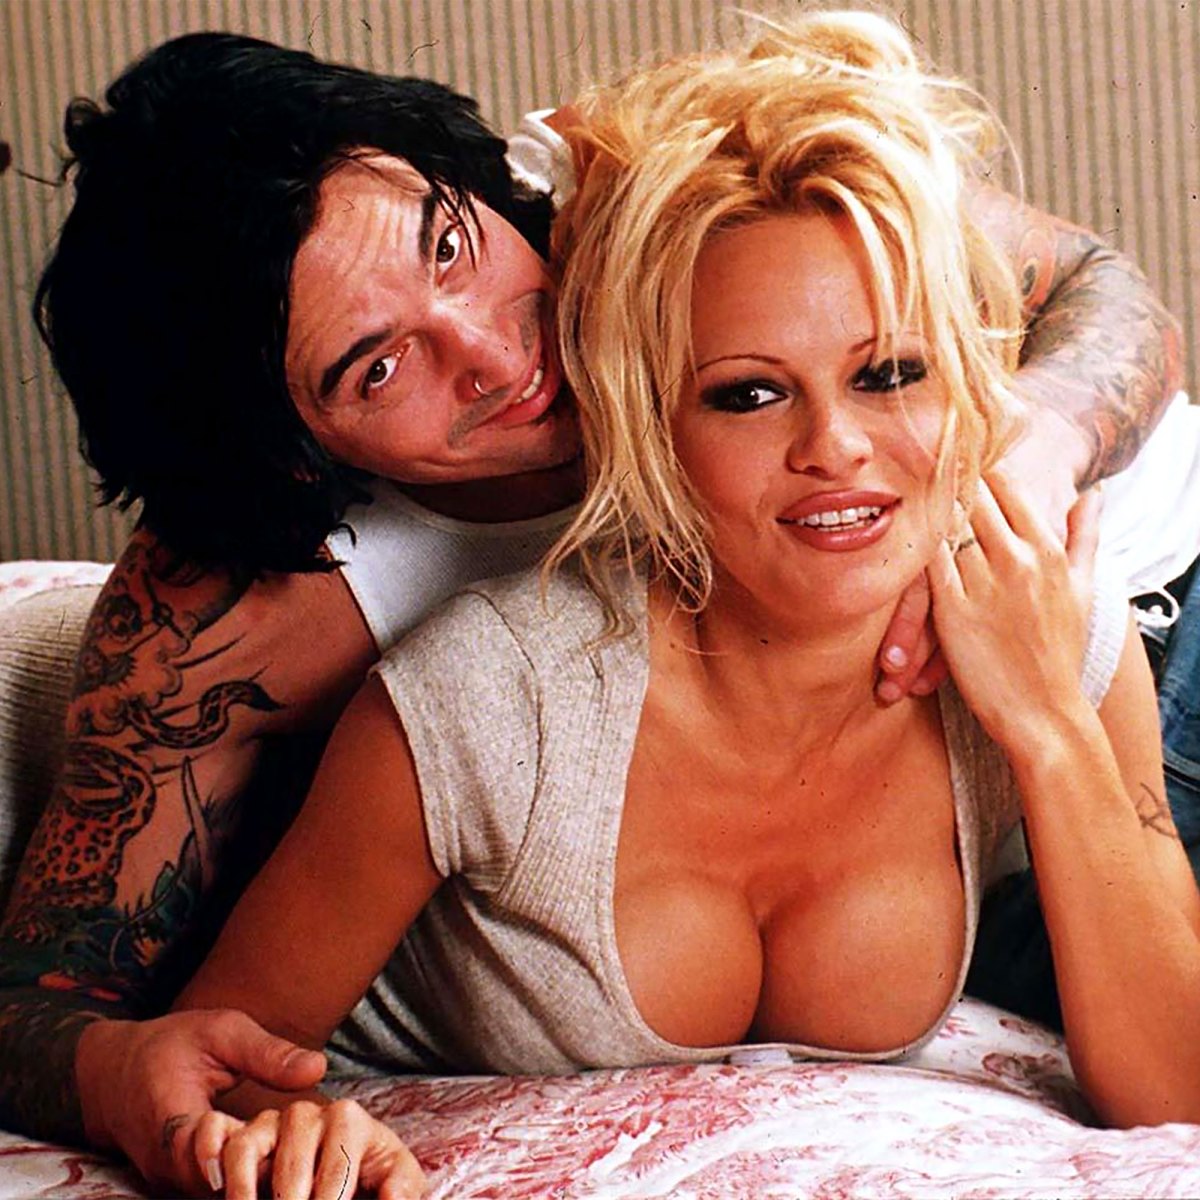 Tommy Lee and Pamela Anderson